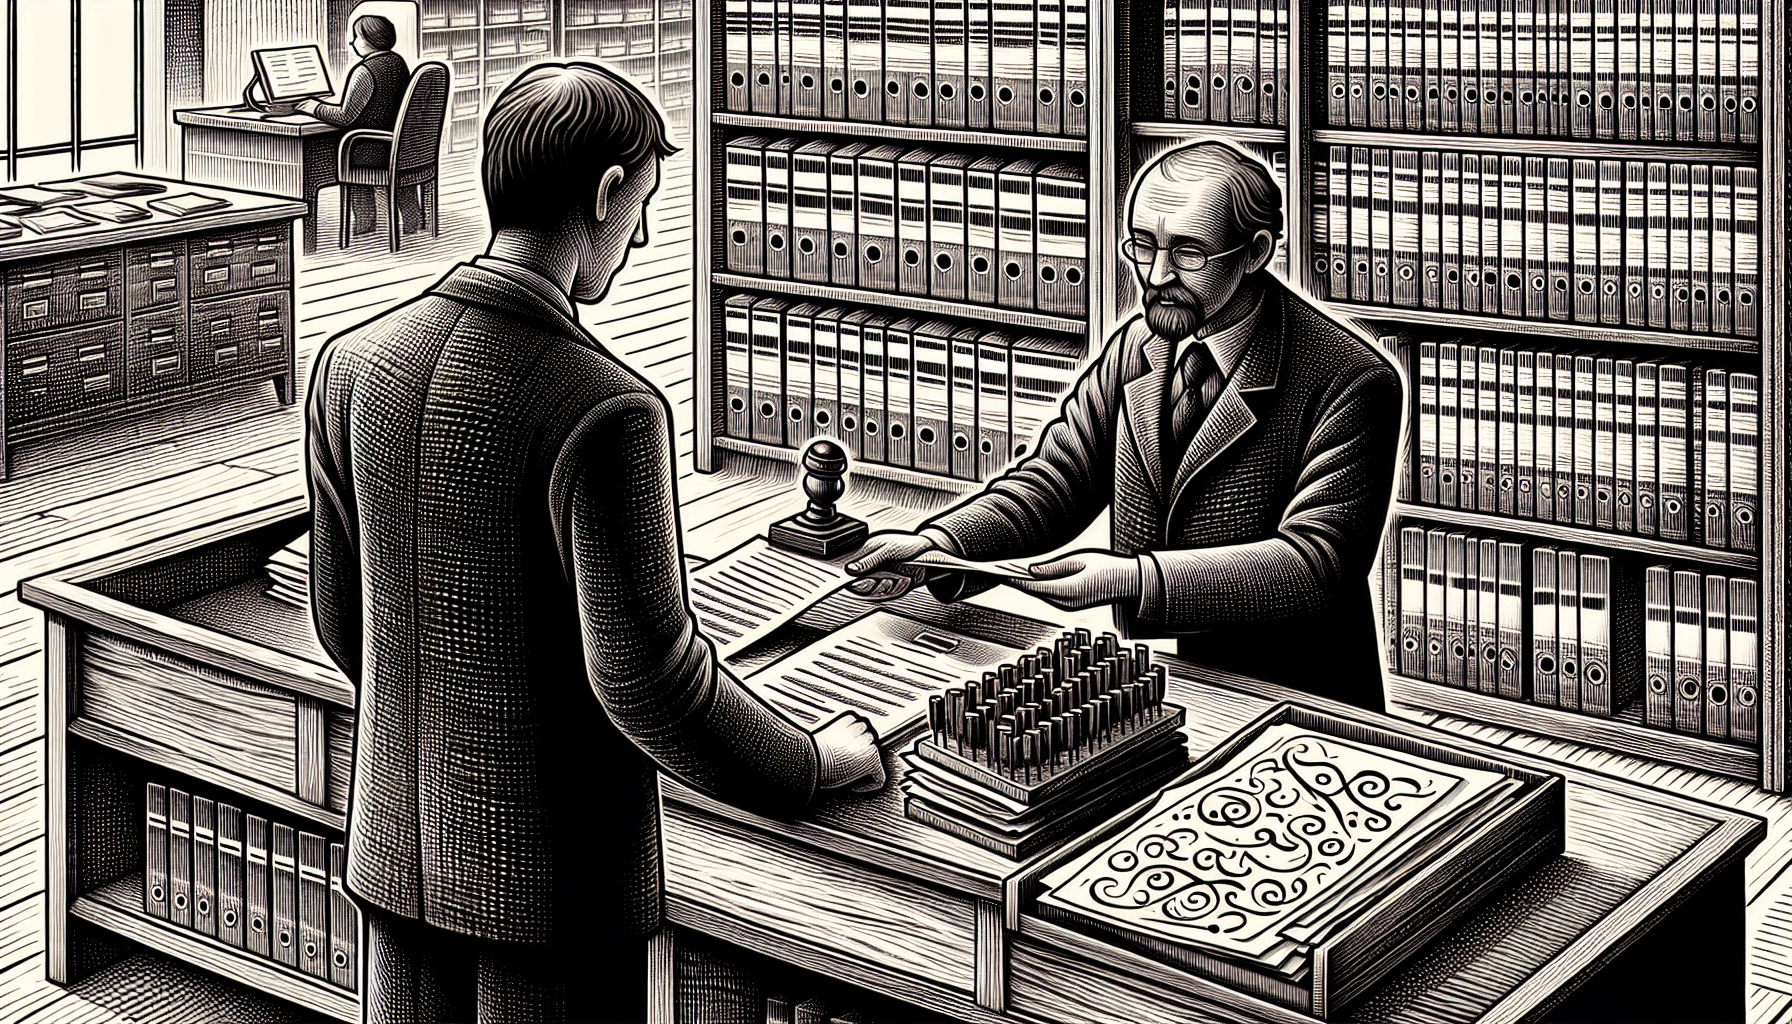 Illustration of obtaining a copy of a divorce decree from the court clerk's office